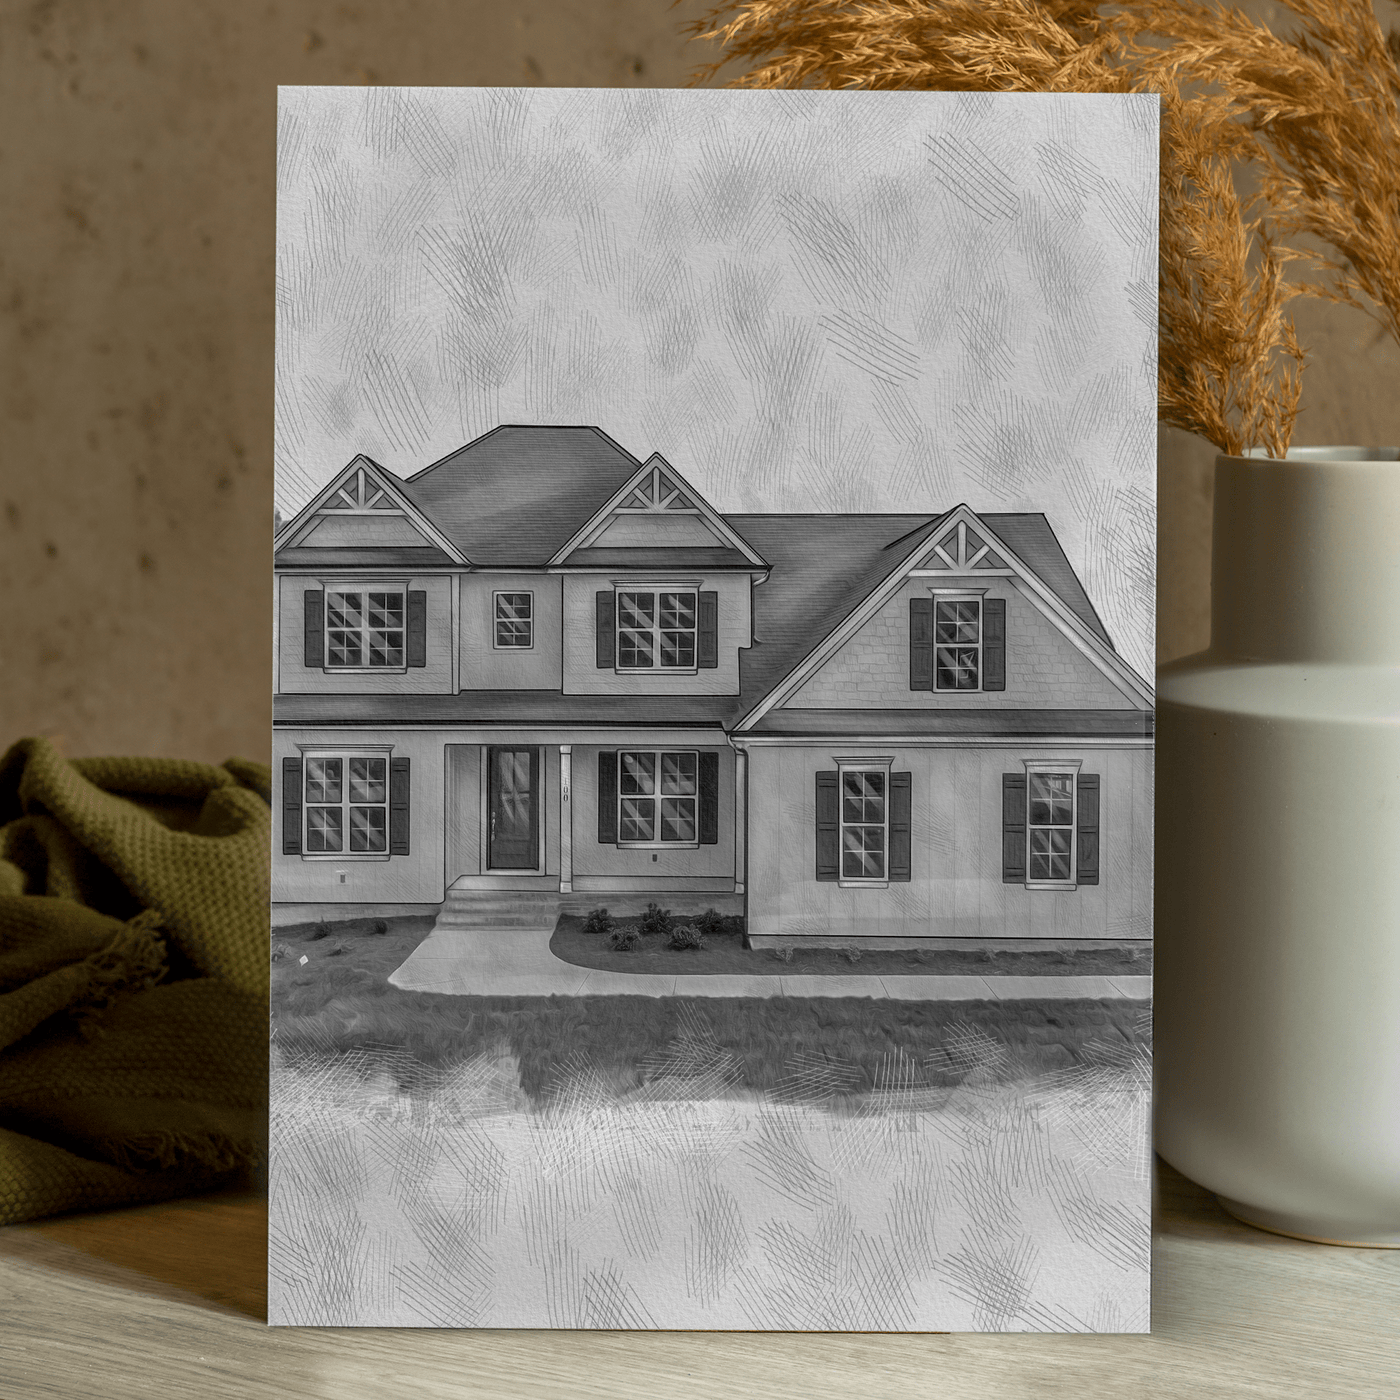 pencil drawing of a house done in black and white